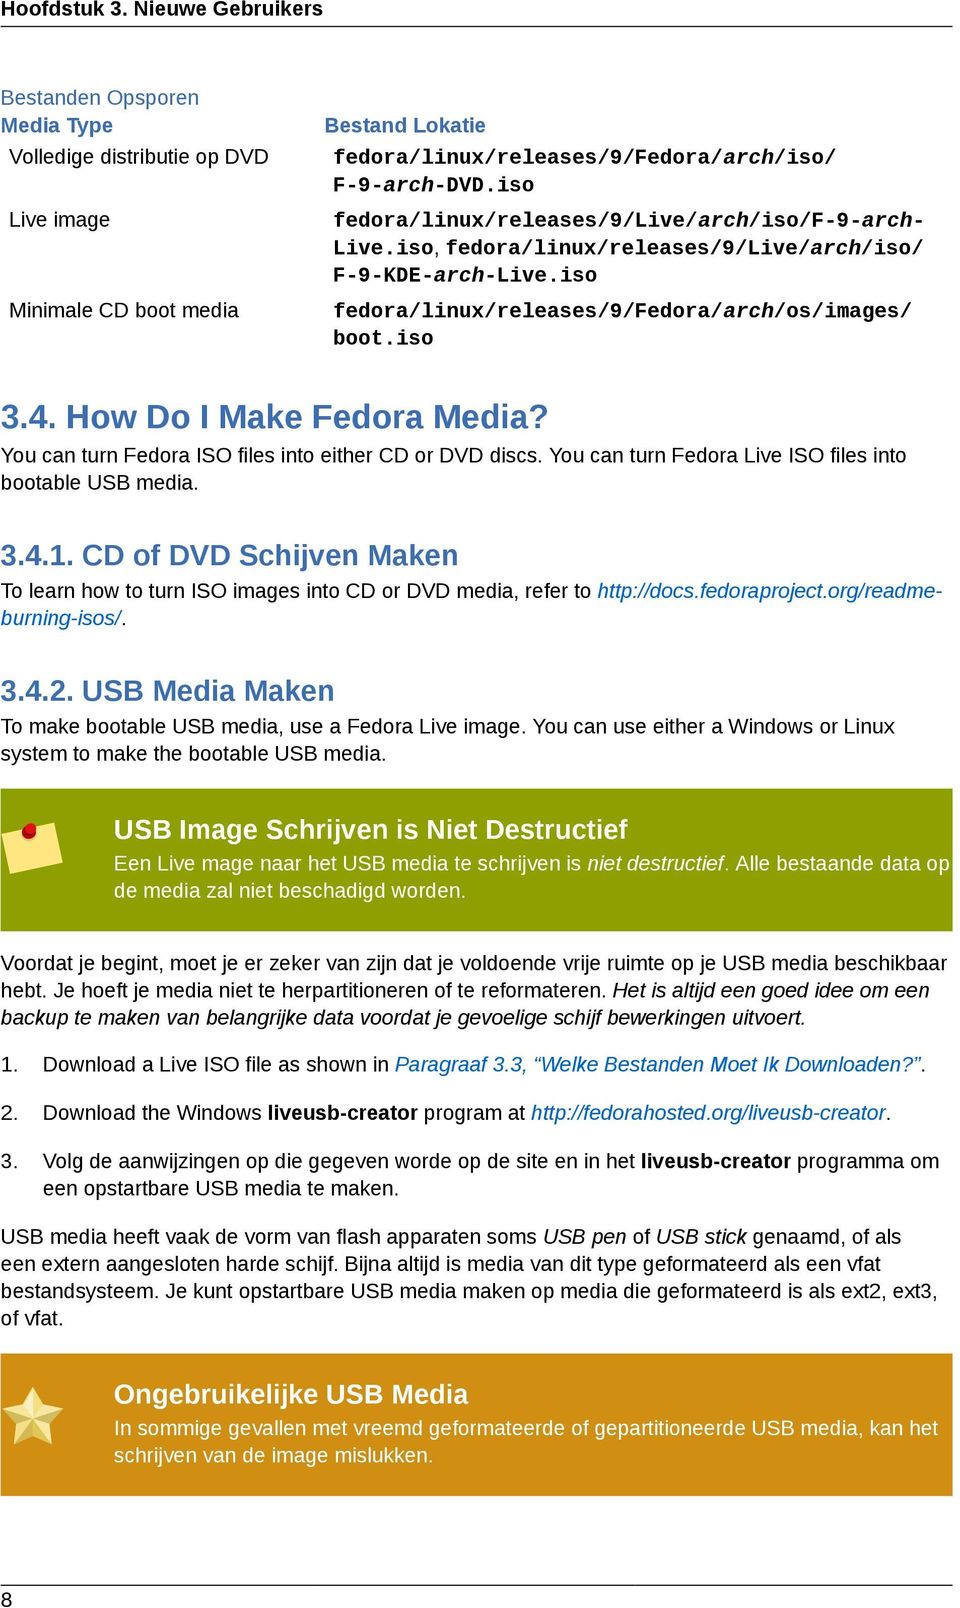 How Do I Make Fedora Media? You can turn Fedora ISO files into either CD or DVD discs. You can turn Fedora Live ISO files into bootable USB media. 3.4.1.